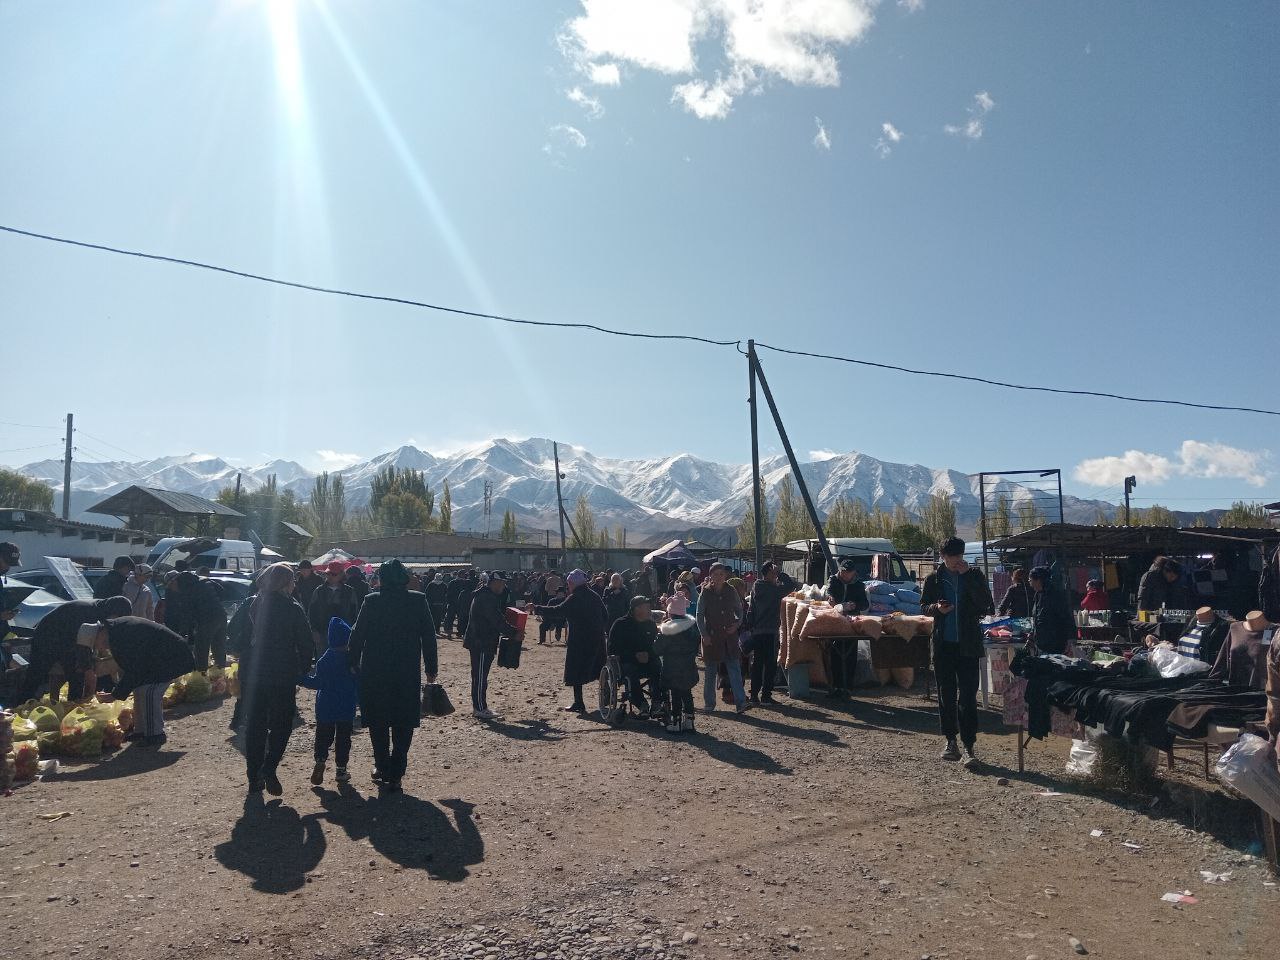 people walking around, tables and booths set up along a dirt road with people selling various things including food, power lines and mountains in the background